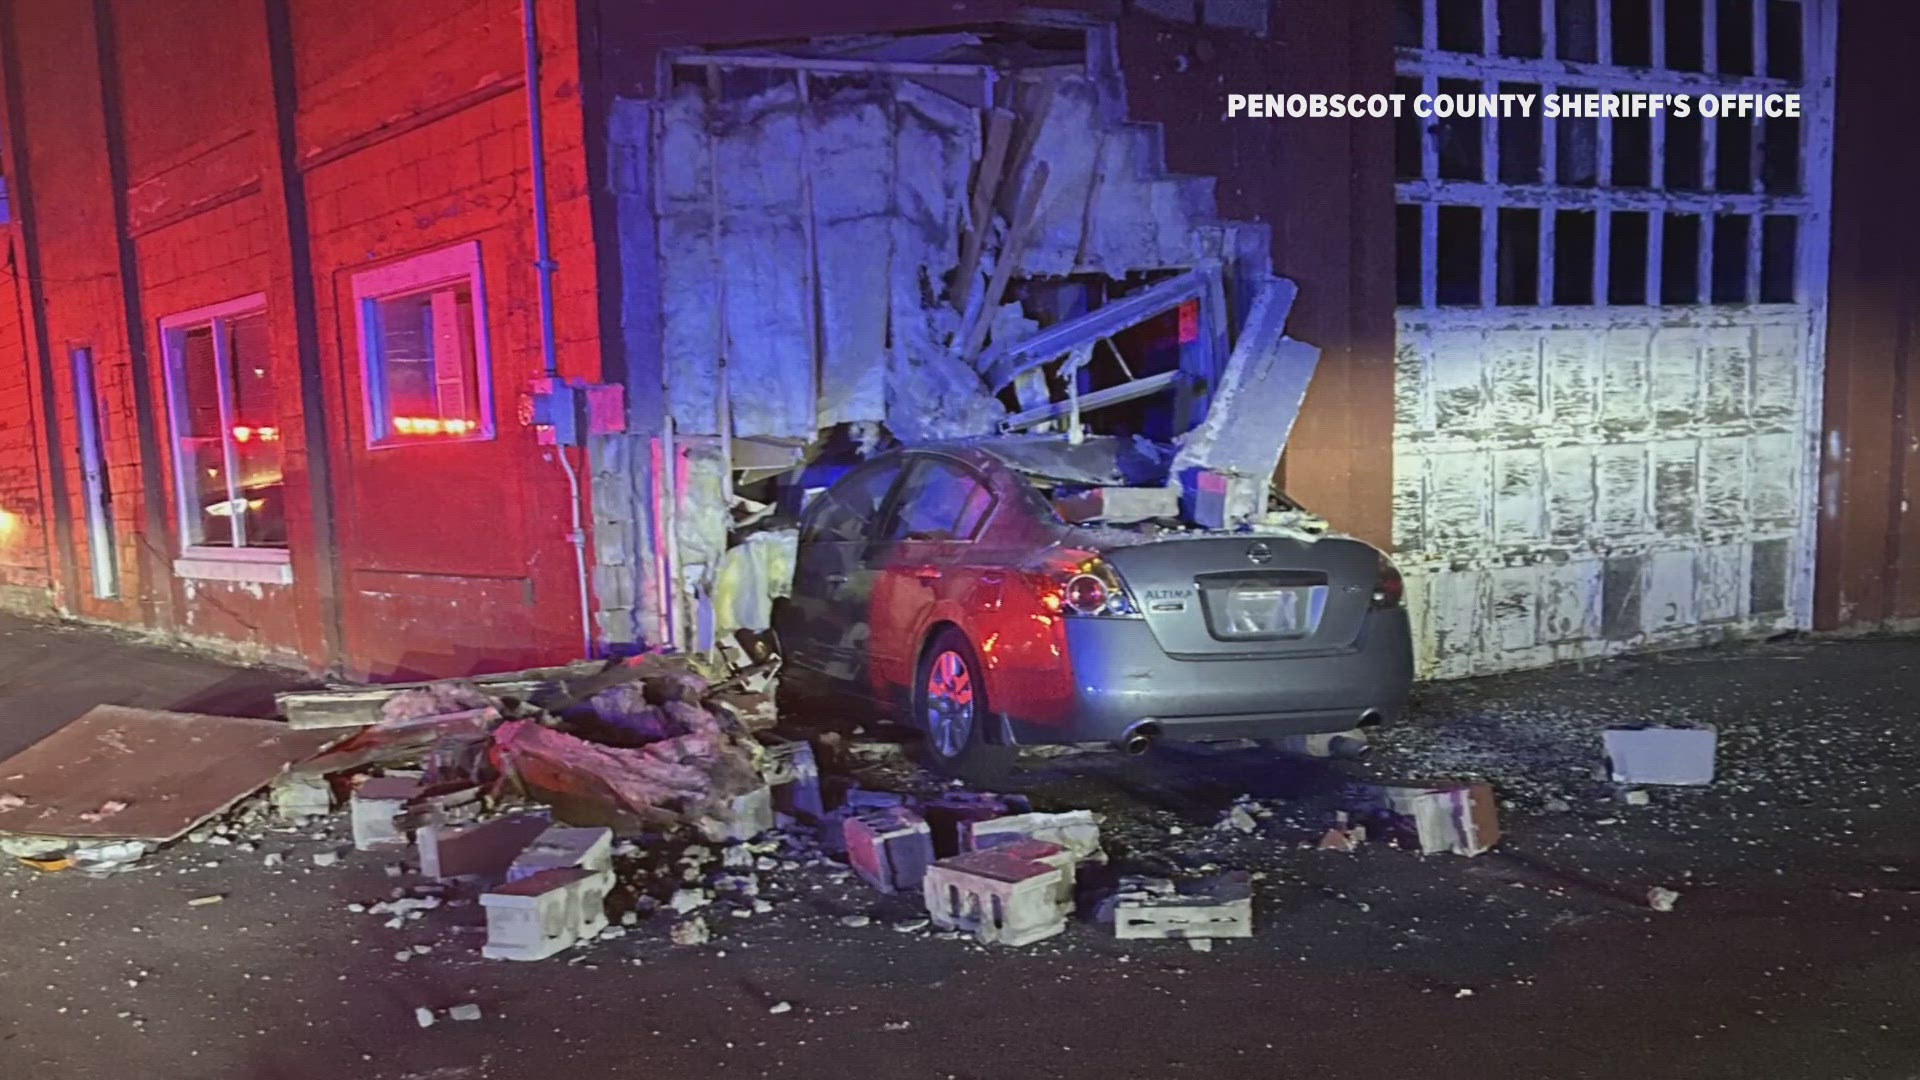 Deputies with the Penobscot County Sheriff's Office said alcohol was a factor in the crash that happened on Main Road in Milford on Saturday night.